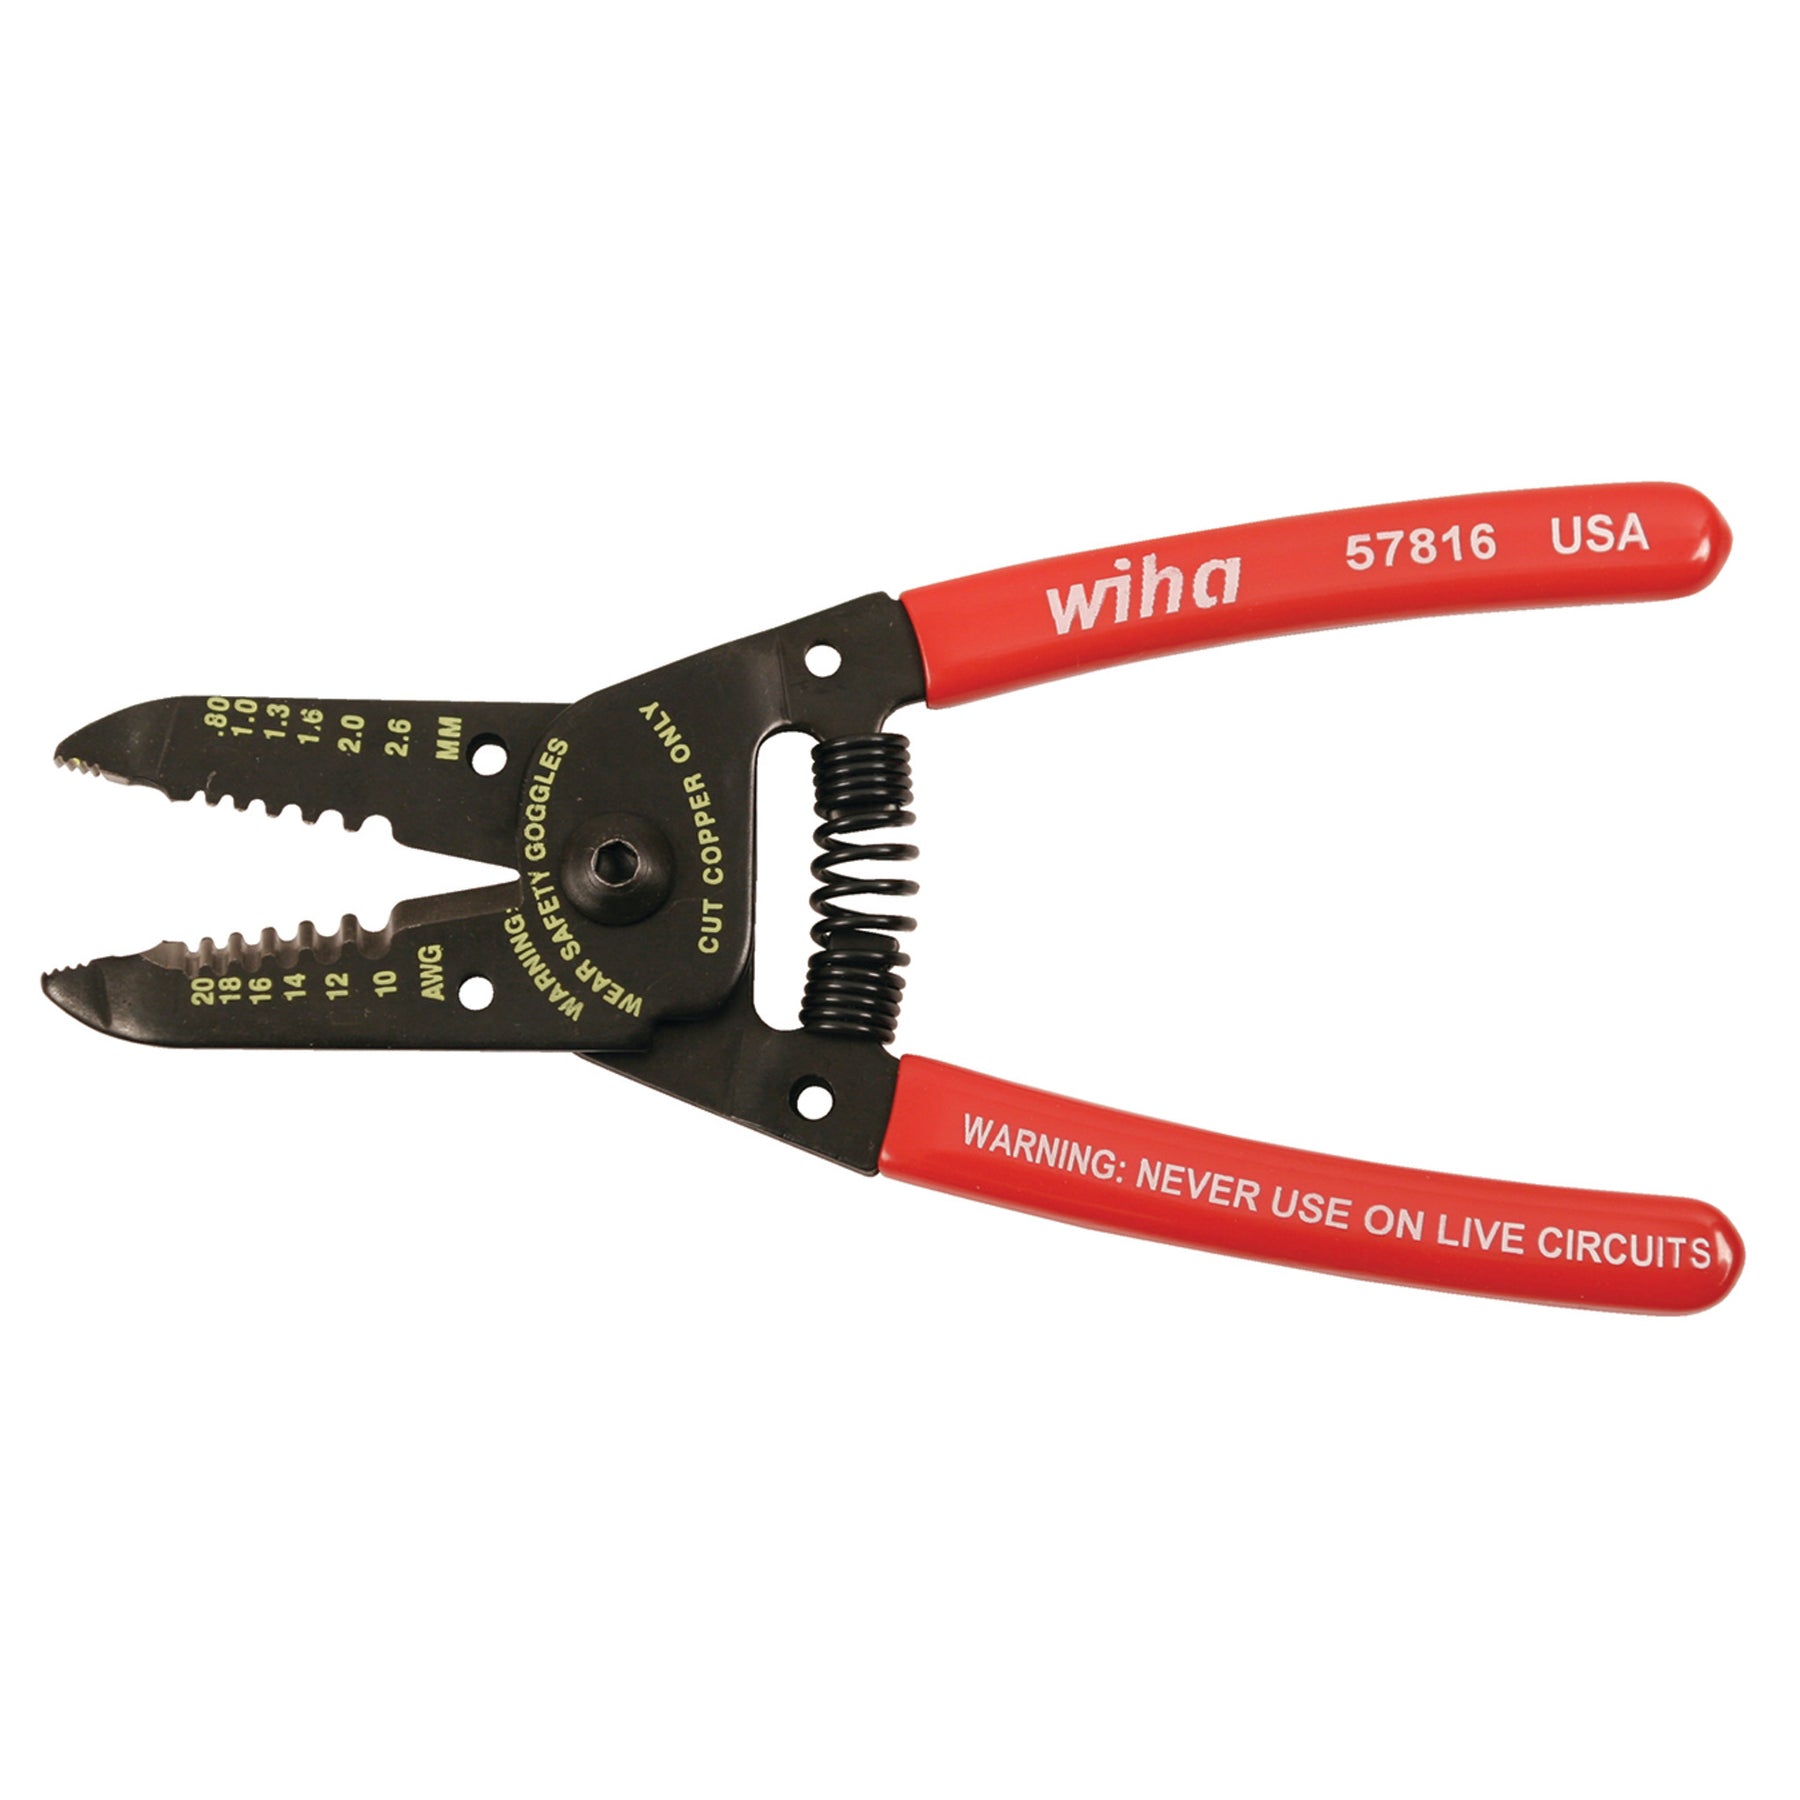 Wiha 57816 Classic Grip Wire Strippers and Cutters 6.0"